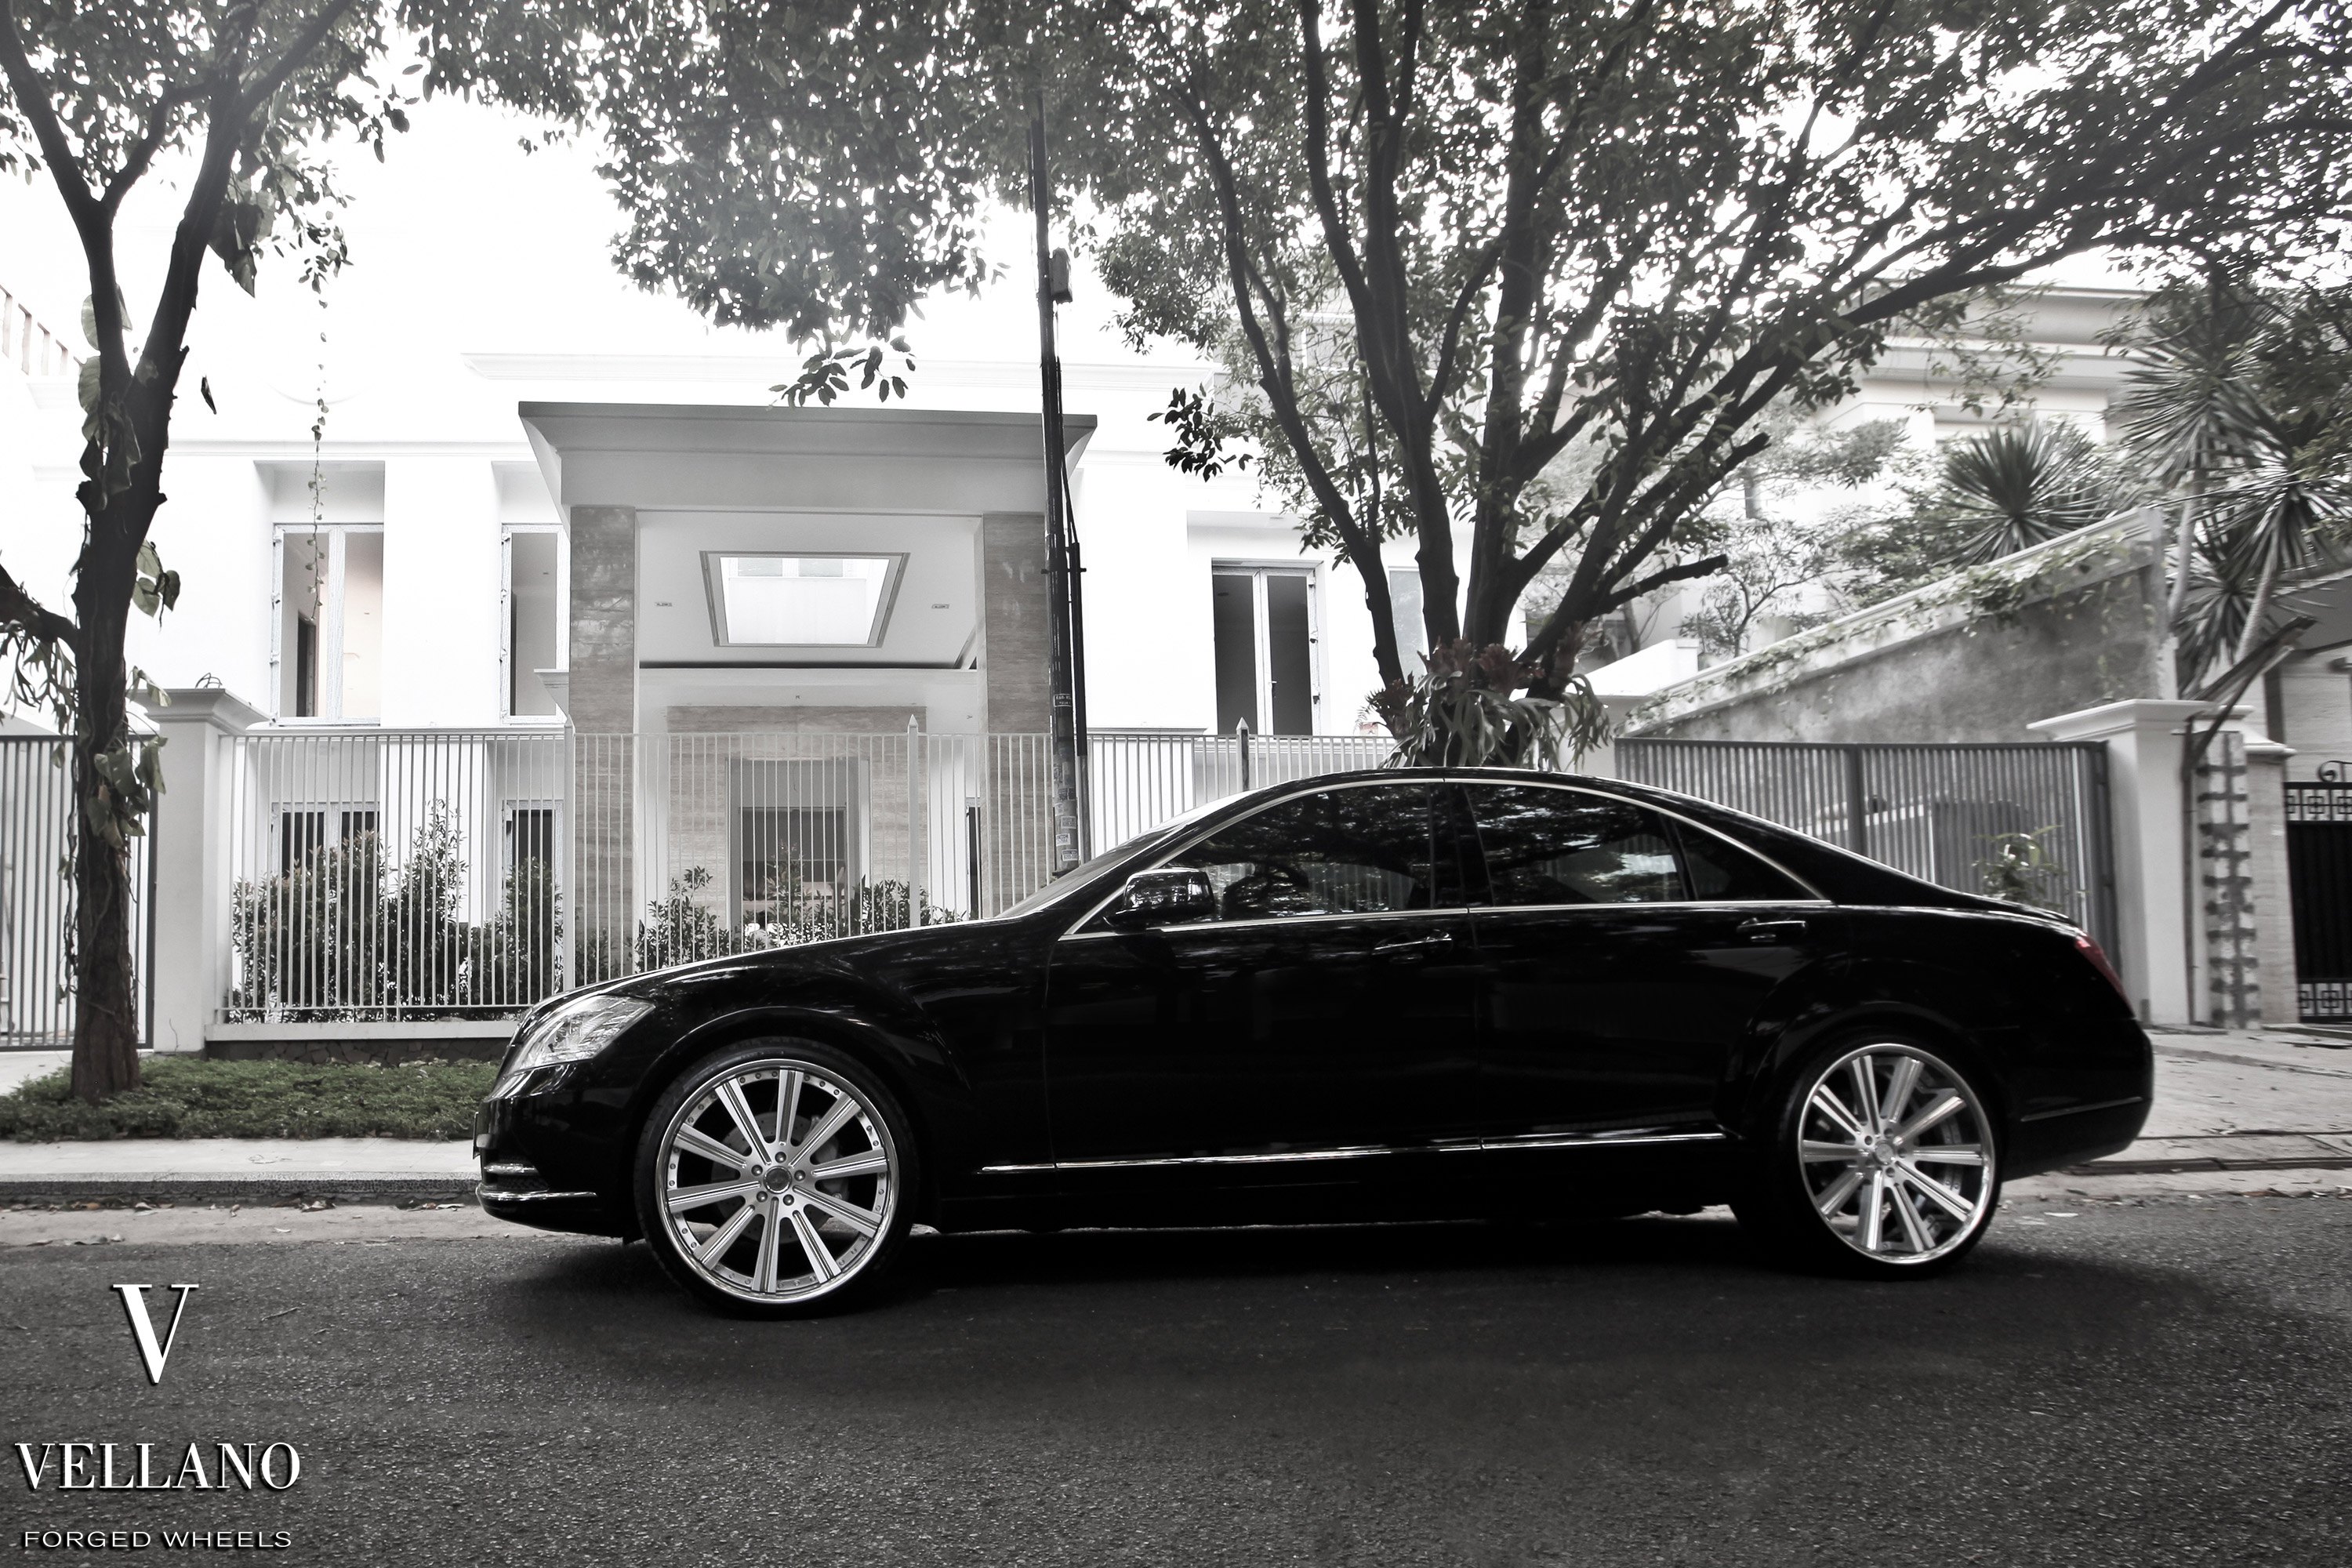 Black Mercedes S-Class with Aftermarket Side Skirts - Photo by Vellano